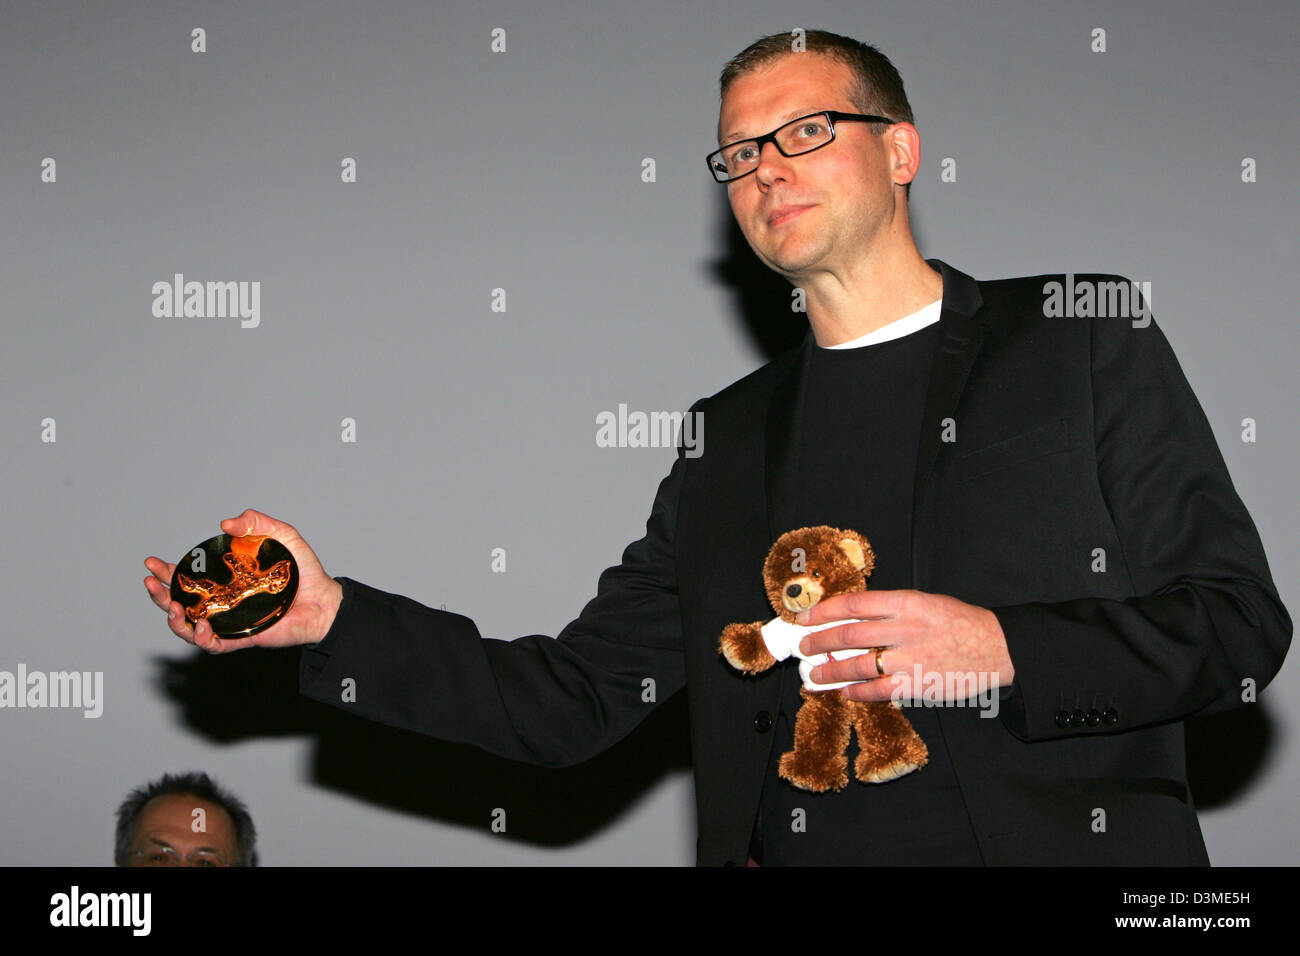 Swedish director Jonas Odell proudly presents his 'Golden Bear' Award at the 56th International Film Festival in Berlin, Monday, 13 February 2006. Odell received the award for his animation film 'Aldrig som foersta gaengen!' (Never again like the first time!) in the category 'Best Short Film'. Photo: Jens Kalaene Stock Photo